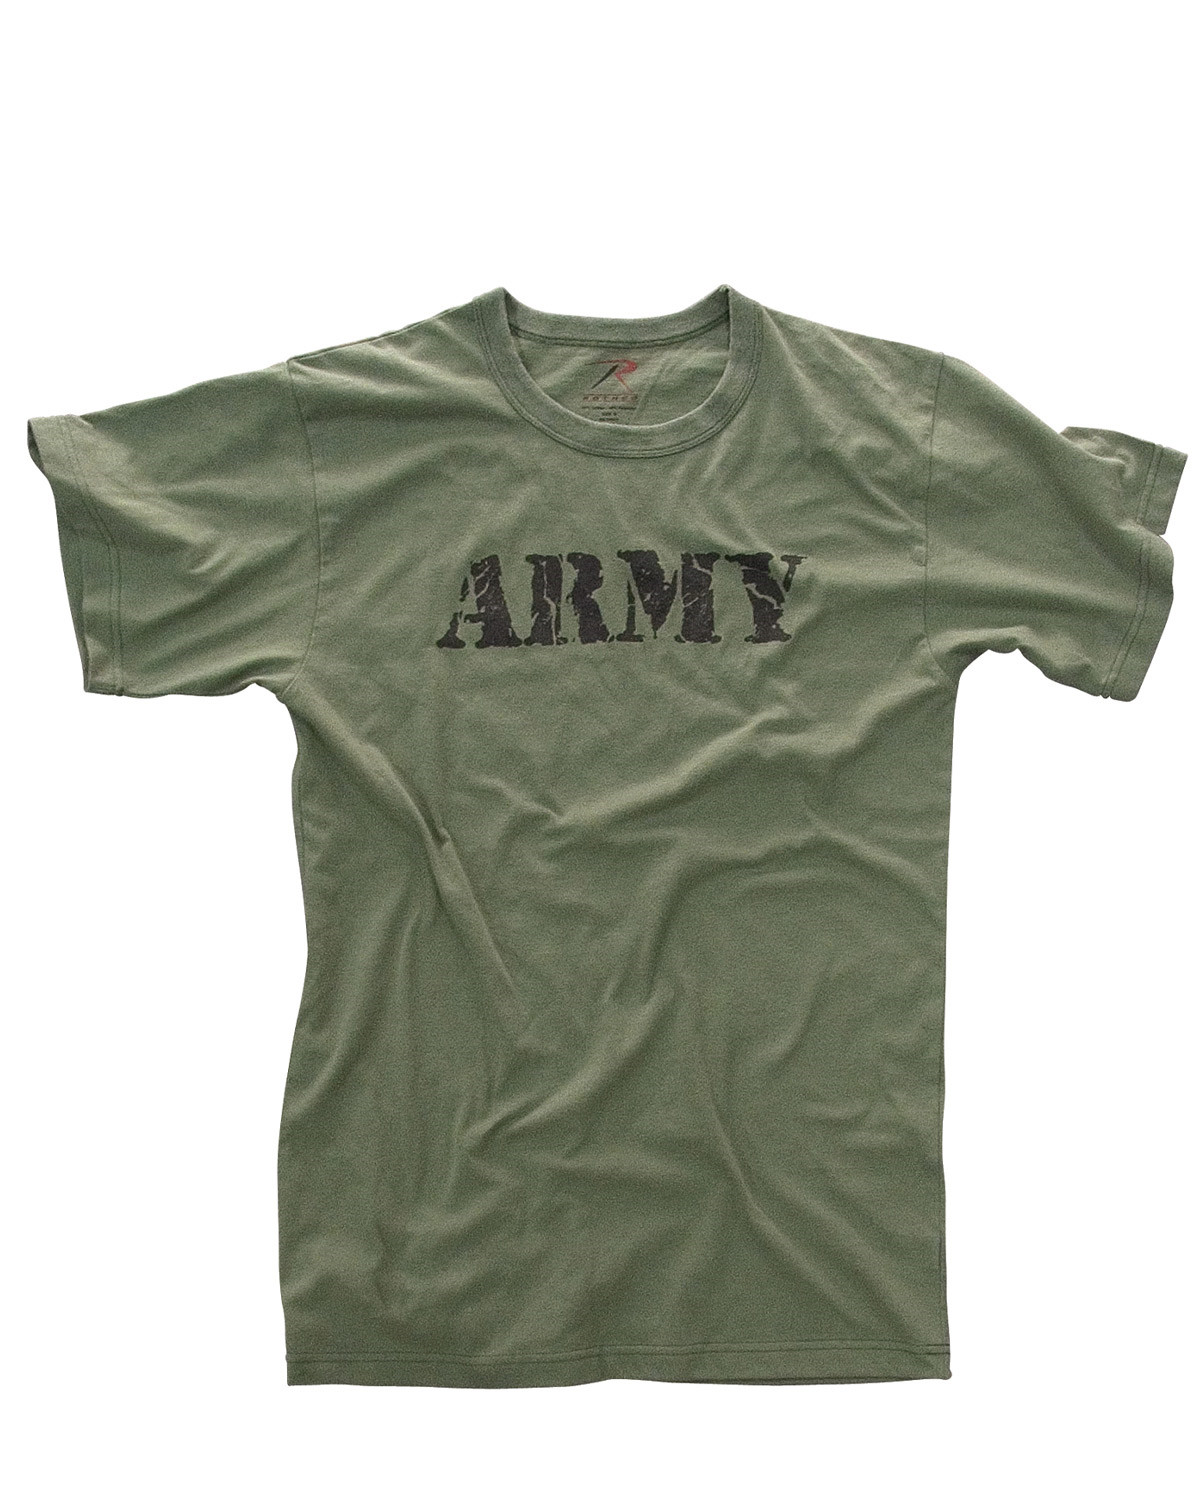 Rothco PT T-shirt - Distressed (Oliven m. ARMY, S)